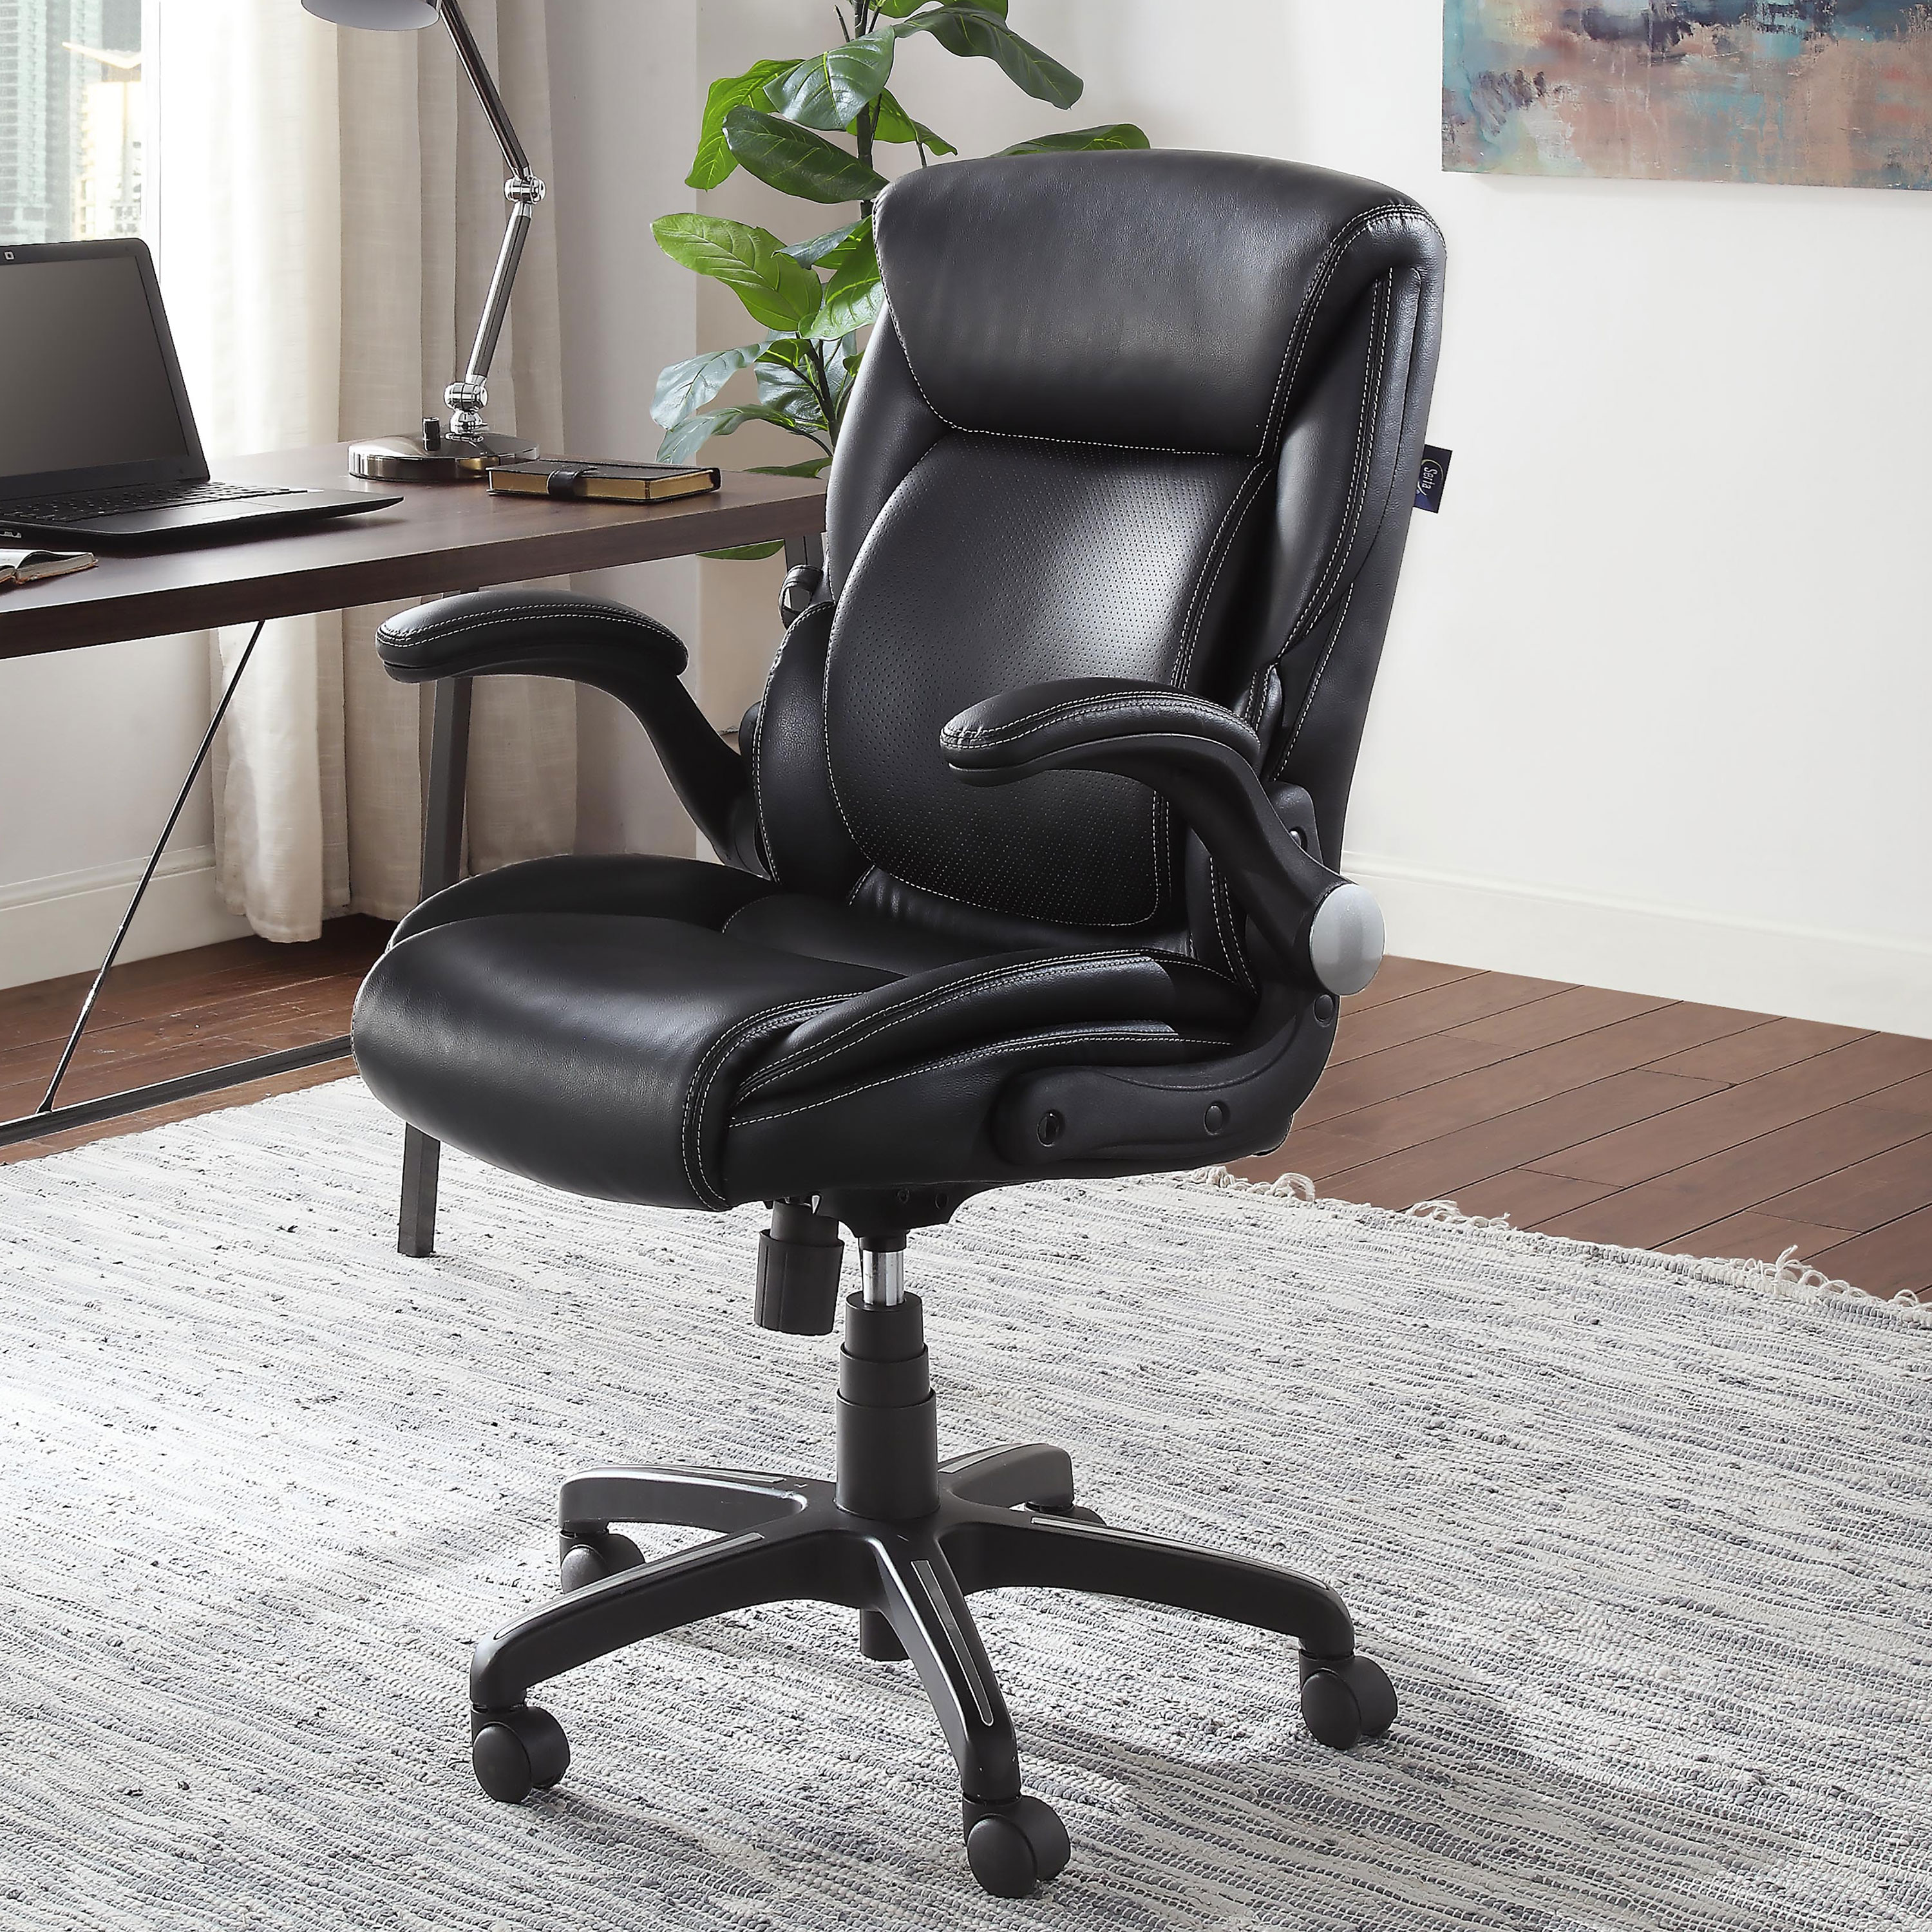 Serta Air Lumbar Bonded Leather Manager Office Chair, Black - image 2 of 15